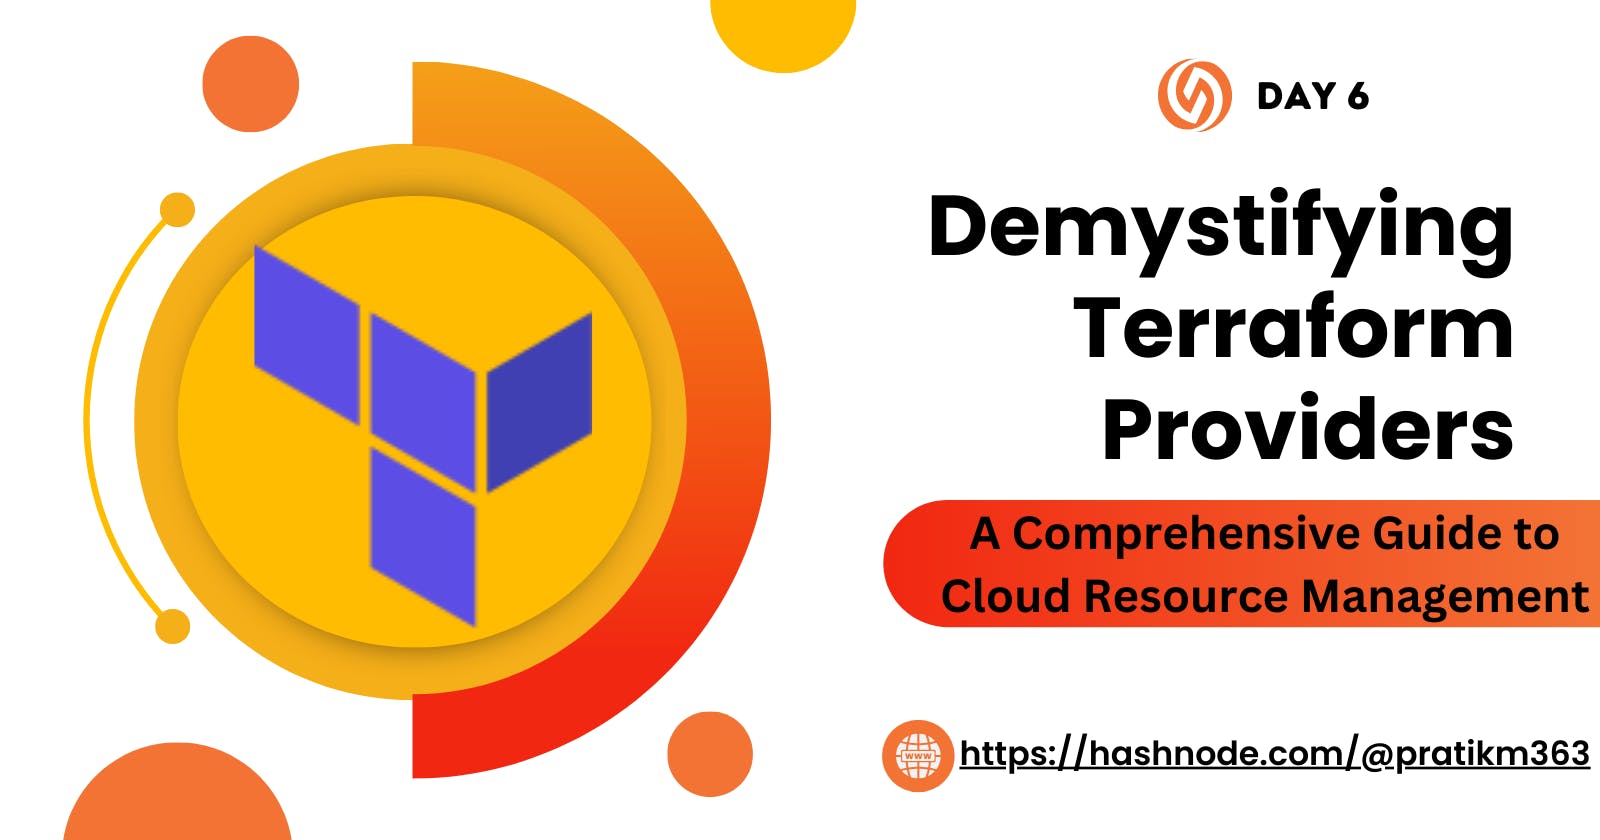 ✡︎Demystifying Terraform Providers: A Comprehensive Guide to Cloud Resource Management